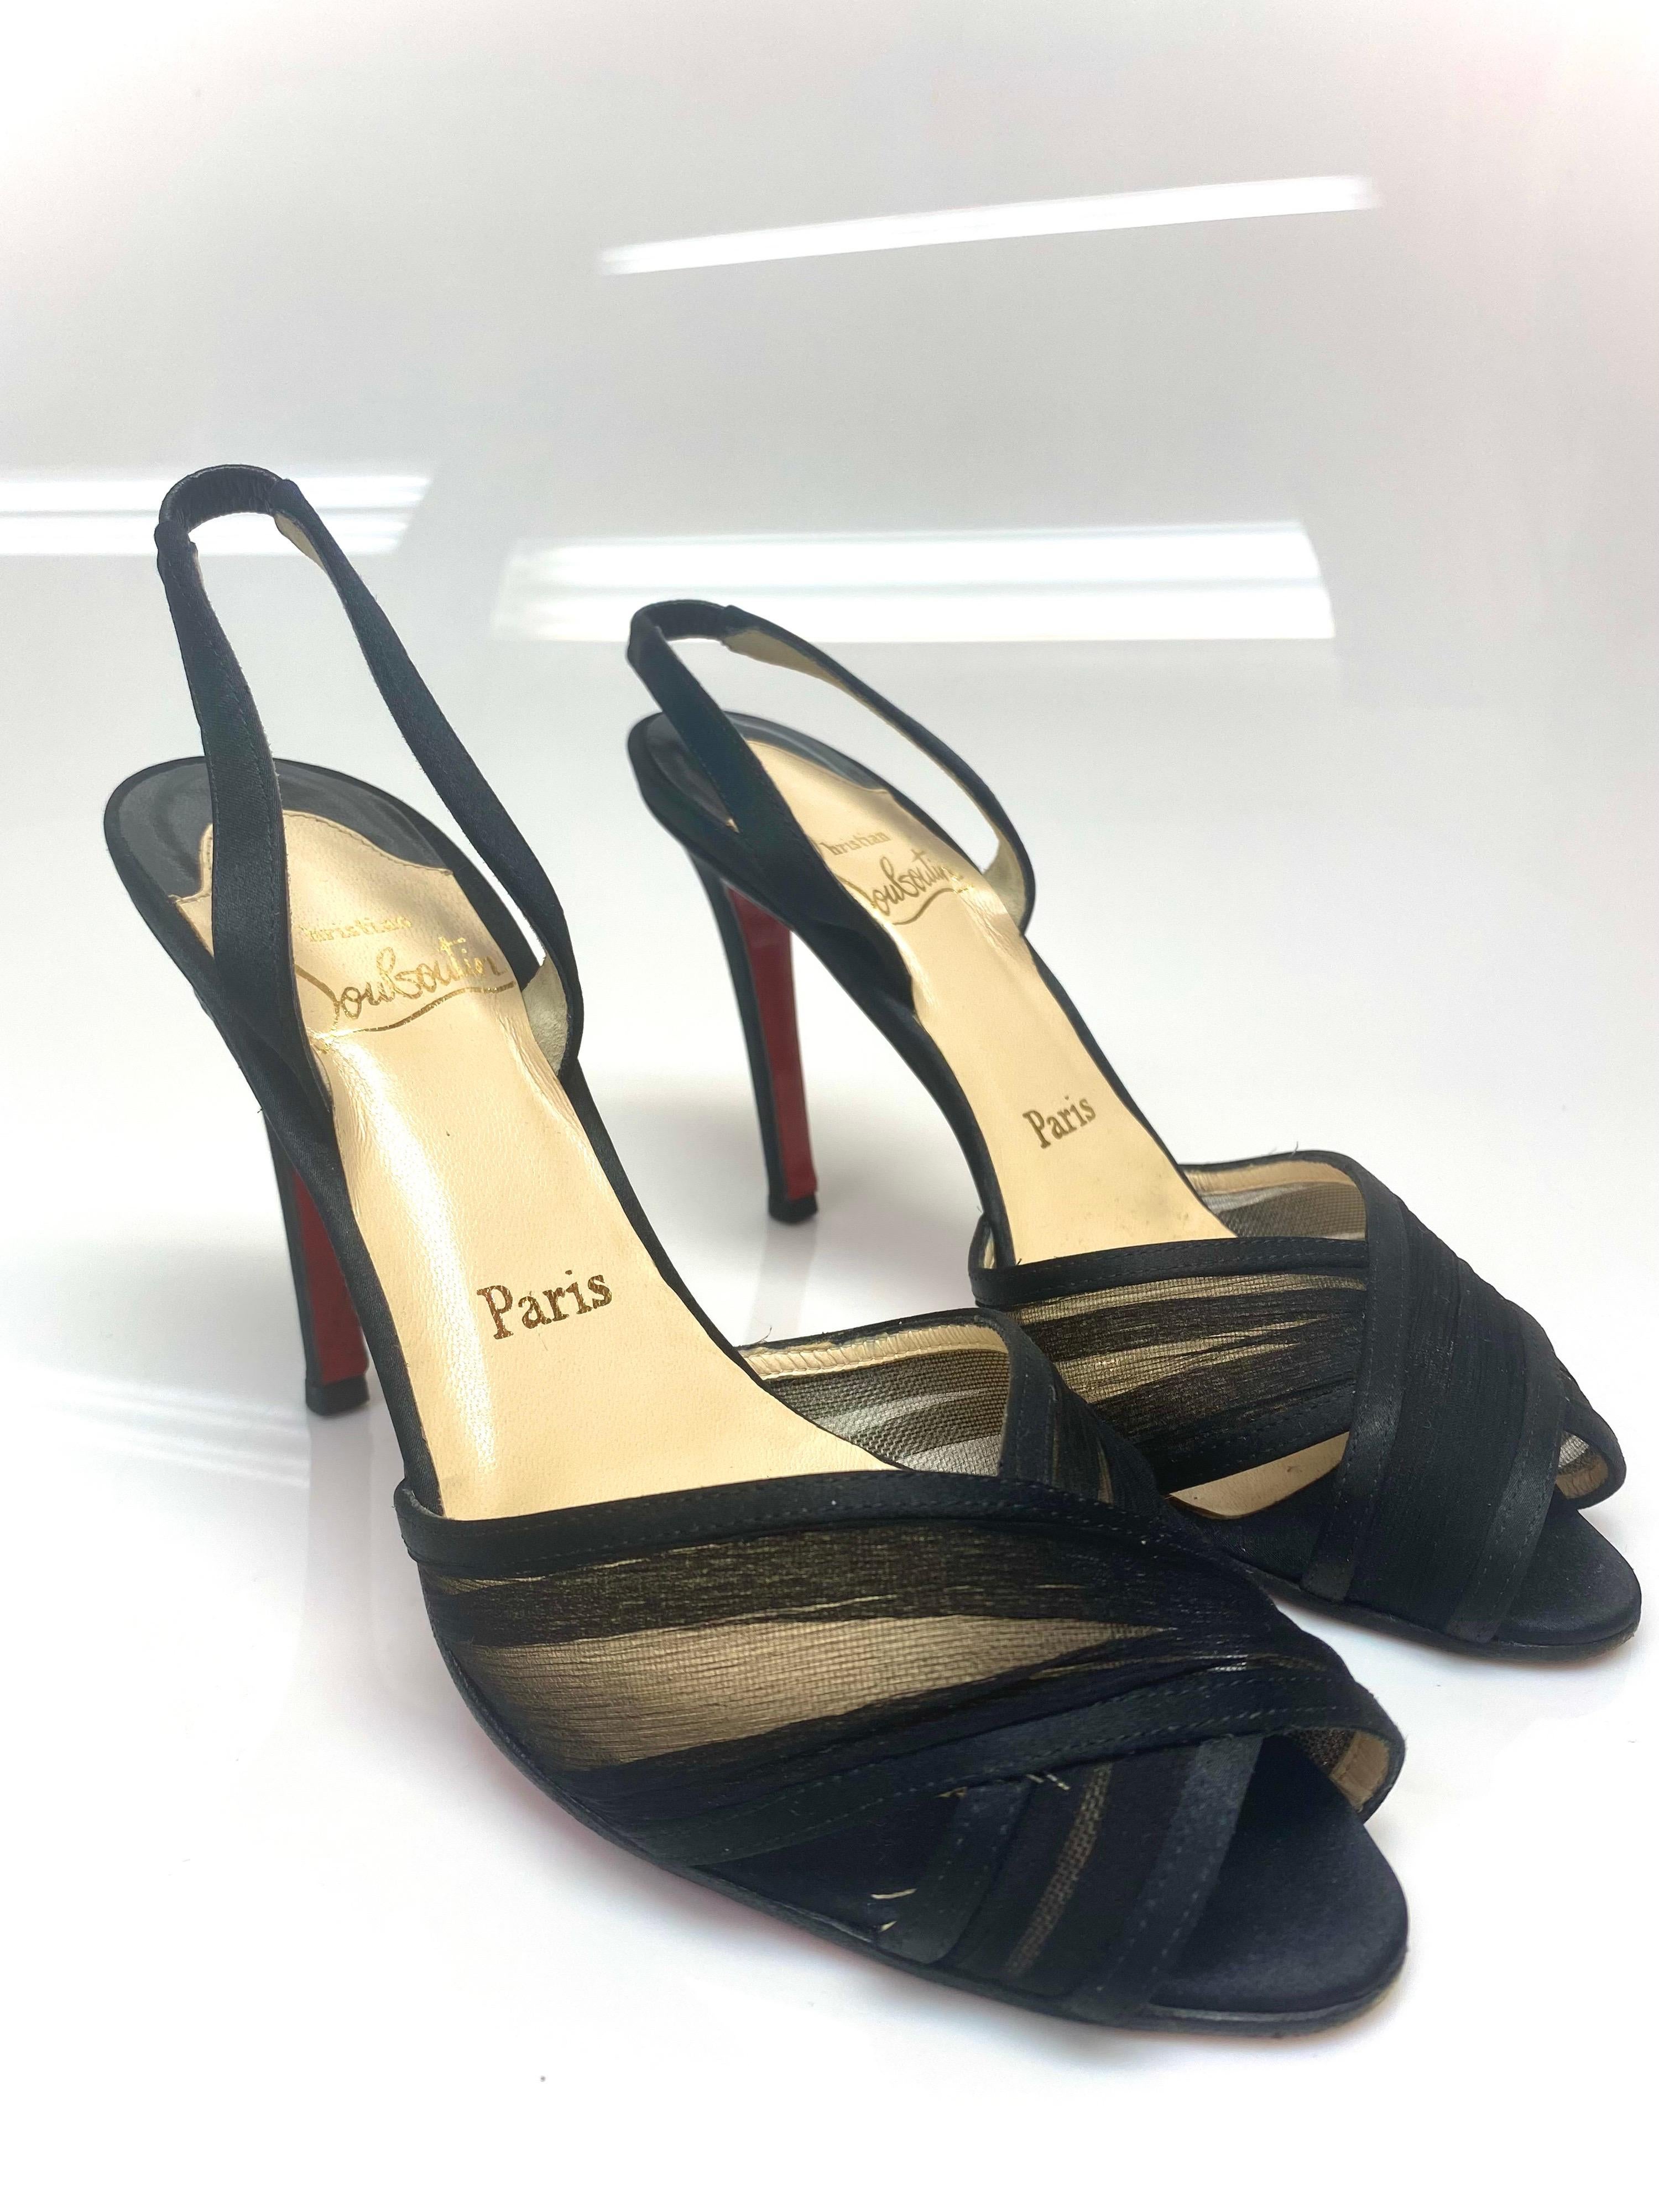 These Christian Louboutin heeled sandals are a reflection of the label's immaculate artistry in shoemaking. Beautiful black criss-cross detailing line the front of the shoe and they're secured with slingbacks. Condition is good but there are signs